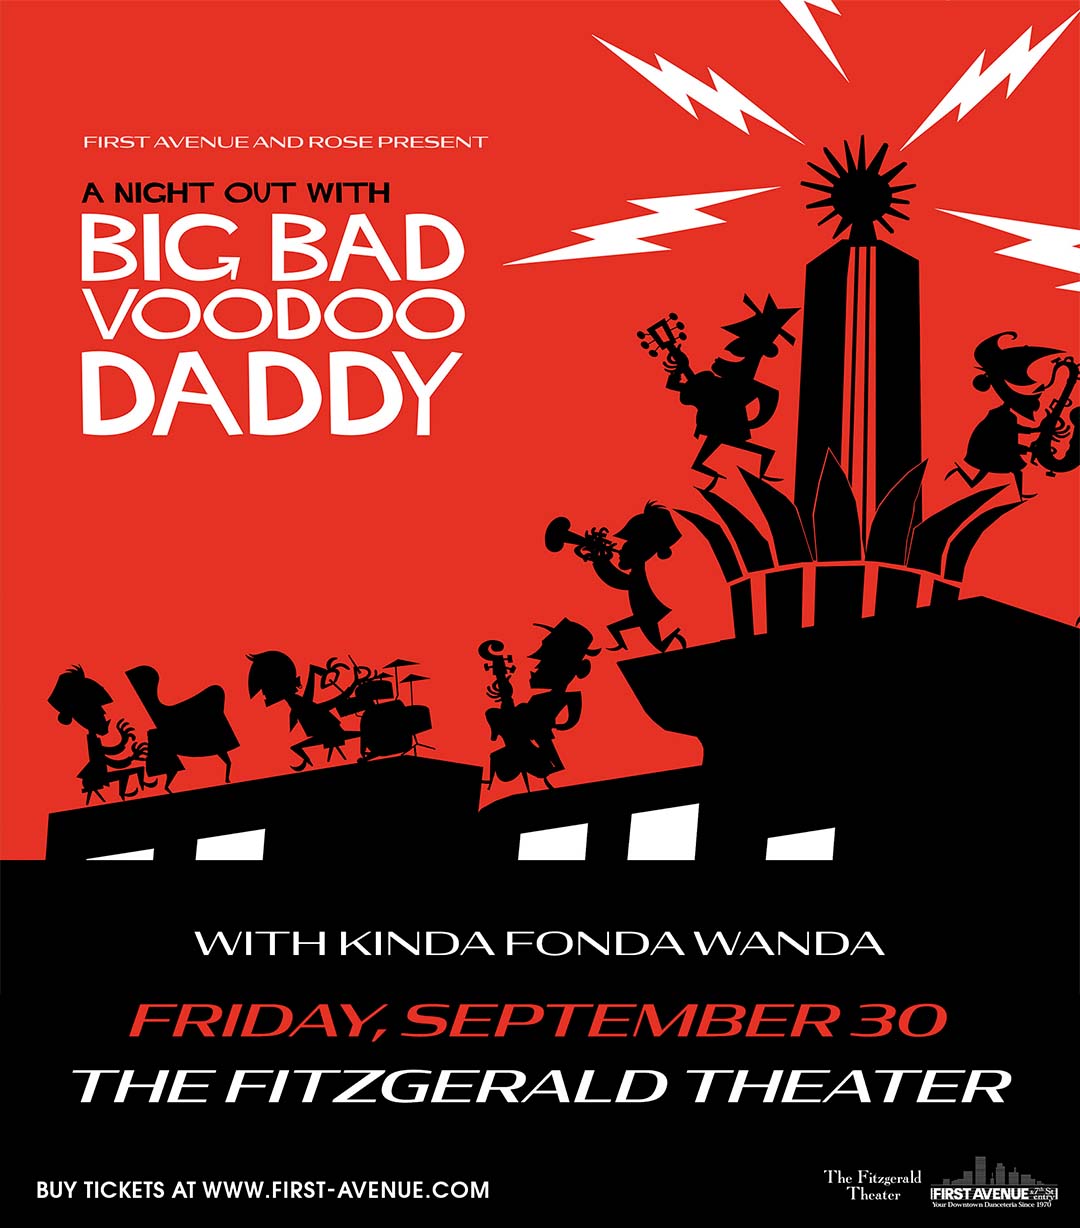 Big Bad Voodoo Daddy ★ The Fitzgerald Theater First Avenue